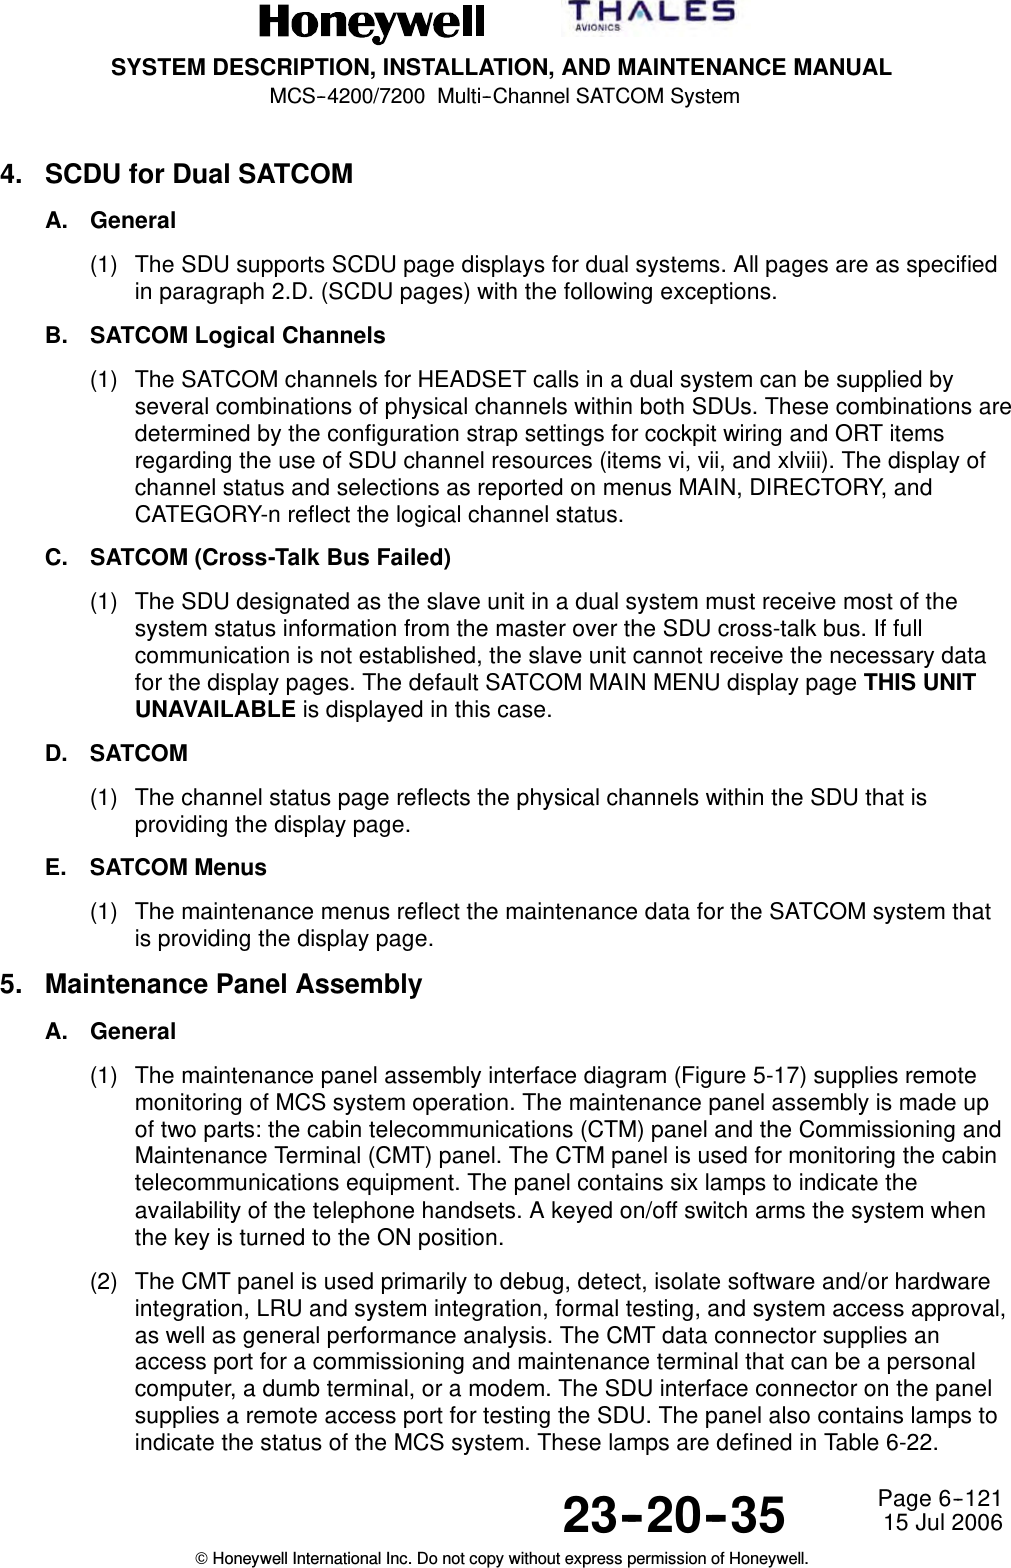 SYSTEM DESCRIPTION, INSTALLATION, AND MAINTENANCE MANUALMCS--4200/7200 Multi--Channel SATCOM System23--20--35 15 Jul 2006Honeywell International Inc. Do not copy without express permission of Honeywell.Page 6--1214. SCDU for Dual SATCOMA. General(1) The SDU supports SCDU page displays for dual systems. All pages are as specifiedin paragraph 2.D. (SCDU pages) with the following exceptions.B. SATCOM Logical Channels(1) The SATCOM channels for HEADSET calls in a dual system can be supplied byseveral combinations of physical channels within both SDUs. These combinations aredetermined by the configuration strap settings for cockpit wiring and ORT itemsregarding the use of SDU channel resources (items vi, vii, and xlviii). The display ofchannel status and selections as reported on menus MAIN, DIRECTORY, andCATEGORY-n reflect the logical channel status.C. SATCOM (Cross-Talk Bus Failed)(1) The SDU designated as the slave unit in a dual system must receive most of thesystem status information from the master over the SDU cross-talk bus. If fullcommunication is not established, the slave unit cannot receive the necessary datafor the display pages. The default SATCOM MAIN MENU display page THIS UNITUNAVAILABLE is displayed in this case.D. SATCOM(1) The channel status page reflects the physical channels within the SDU that isproviding the display page.E. SATCOM Menus(1) The maintenance menus reflect the maintenance data for the SATCOM system thatis providing the display page.5. Maintenance Panel AssemblyA. General(1) The maintenance panel assembly interface diagram (Figure 5-17) supplies remotemonitoring of MCS system operation. The maintenance panel assembly is made upof two parts: the cabin telecommunications (CTM) panel and the Commissioning andMaintenance Terminal (CMT) panel. The CTM panel is used for monitoring the cabintelecommunications equipment. The panel contains six lamps to indicate theavailability of the telephone handsets. A keyed on/off switch arms the system whenthe key is turned to the ON position.(2) The CMT panel is used primarily to debug, detect, isolate software and/or hardwareintegration, LRU and system integration, formal testing, and system access approval,as well as general performance analysis. The CMT data connector supplies anaccess port for a commissioning and maintenance terminal that can be a personalcomputer, a dumb terminal, or a modem. The SDU interface connector on the panelsupplies a remote access port for testing the SDU. The panel also contains lamps toindicate the status of the MCS system. These lamps are defined in Table 6-22.